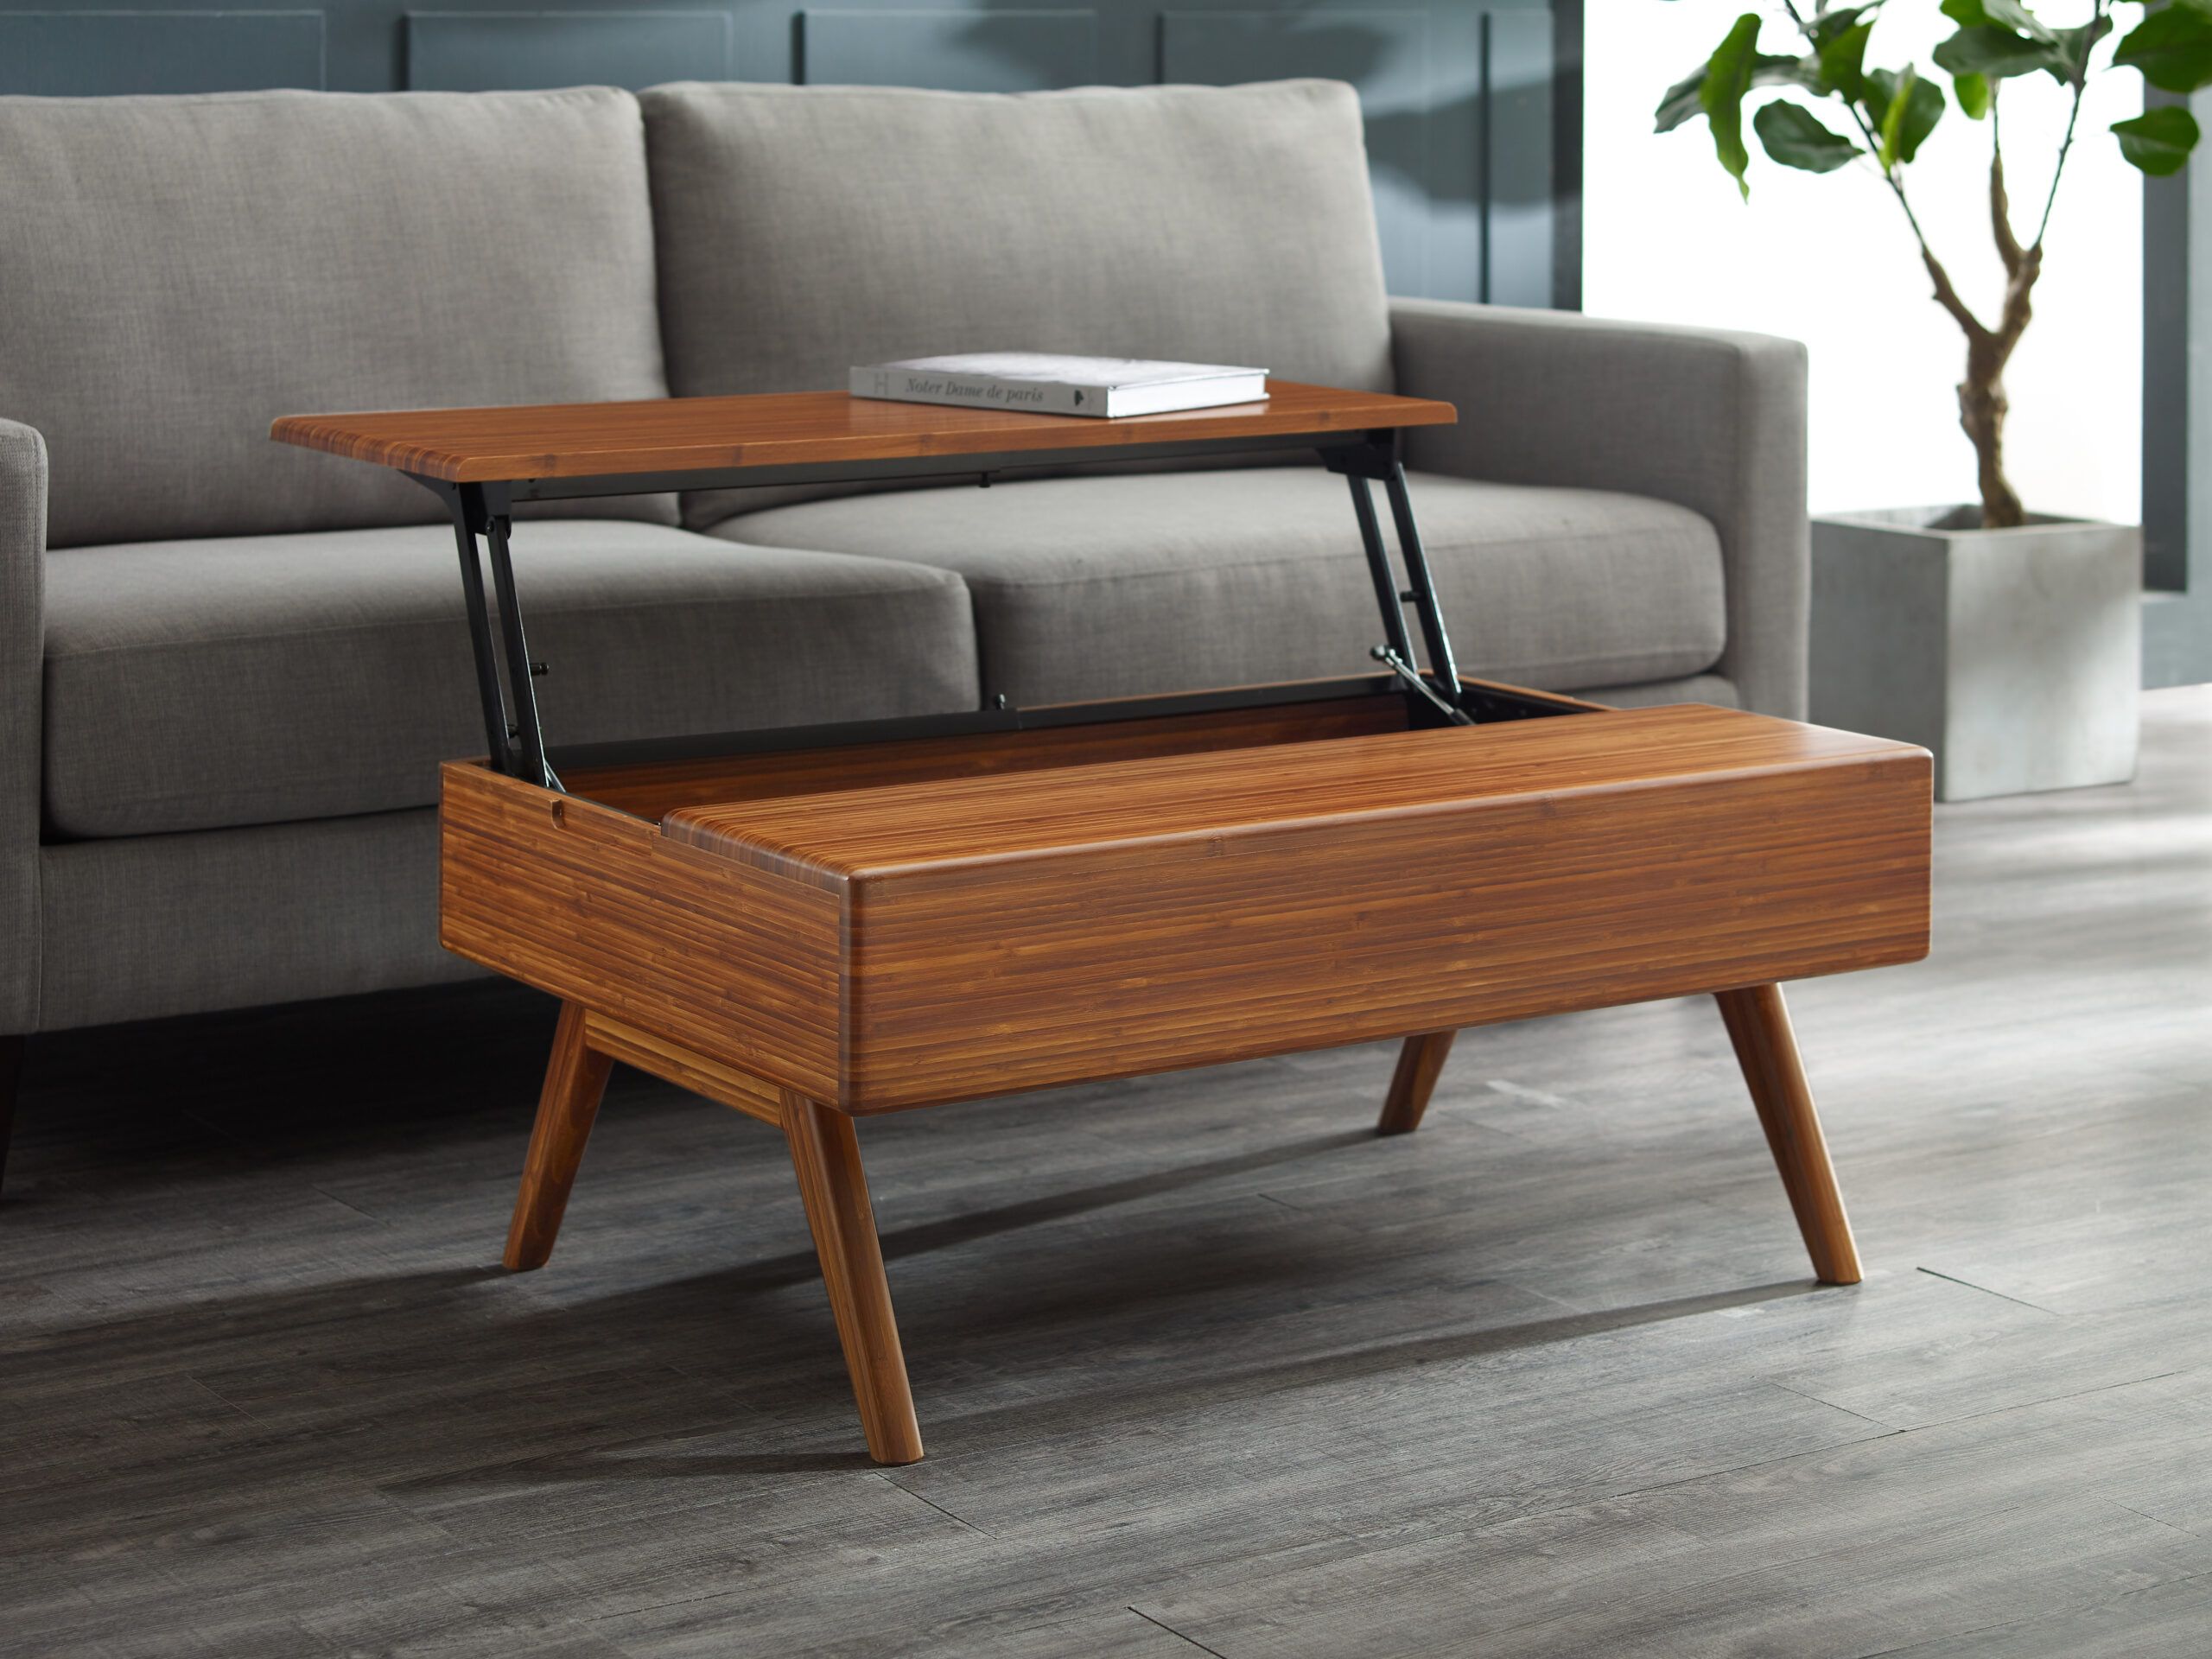 Rhody Lift Top Coffee Table | Greenington | Bedrooms & More Within Modern Wooden Lift Top Tables (View 4 of 15)